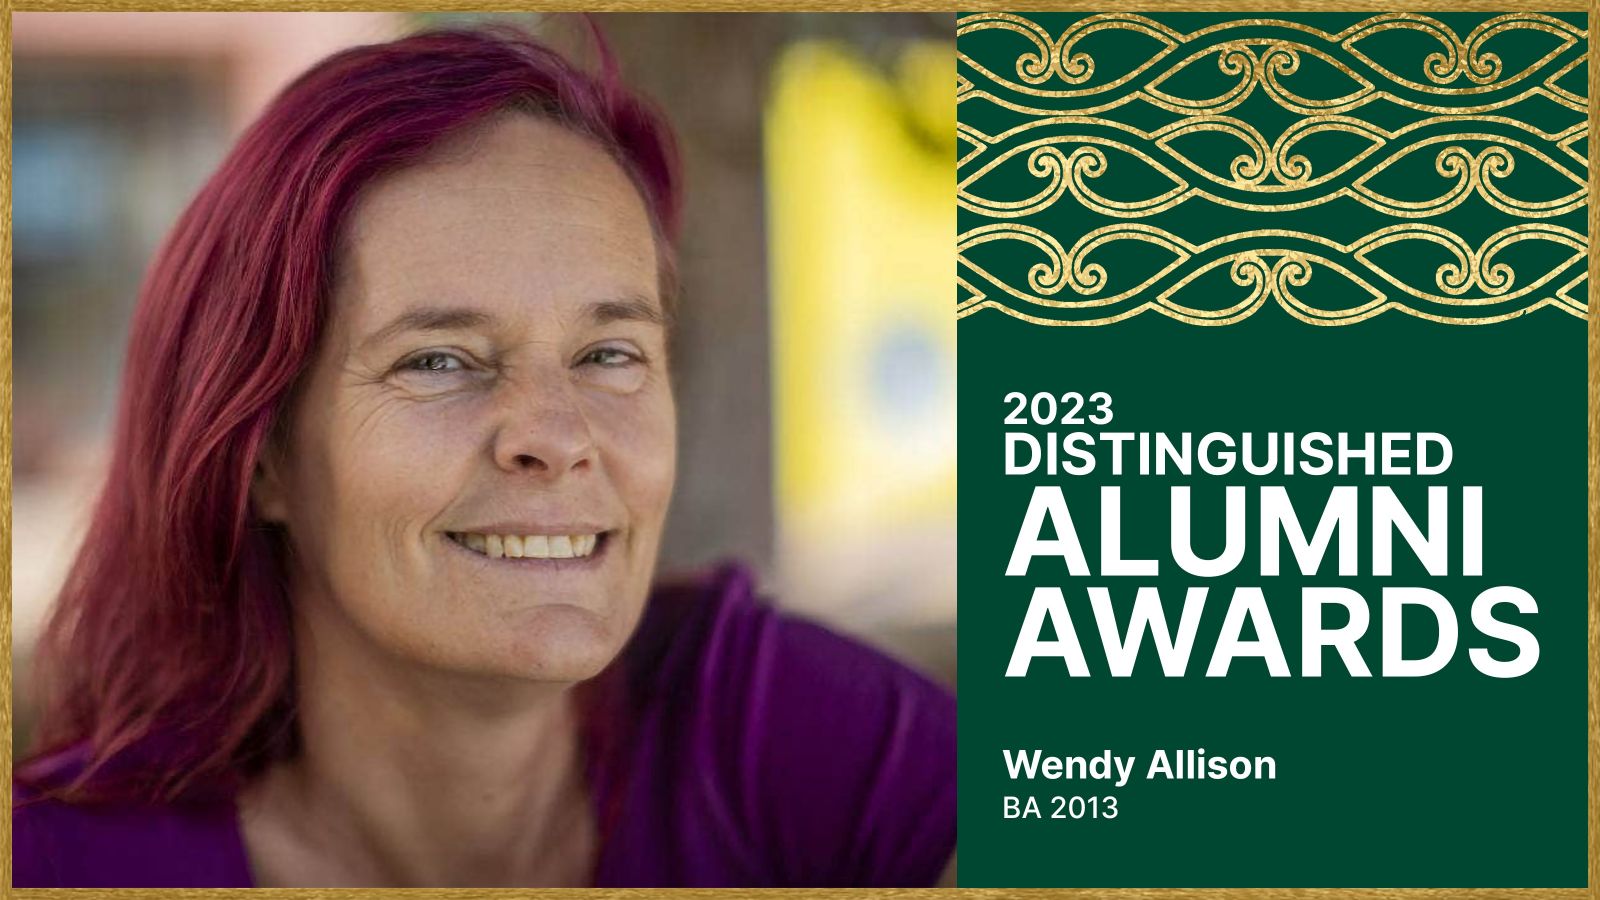 A woman with purple hair smiles at the camera. Text alongside the image says that she's Wendy Allison, 2023 Distinguished Alumni Award winner.